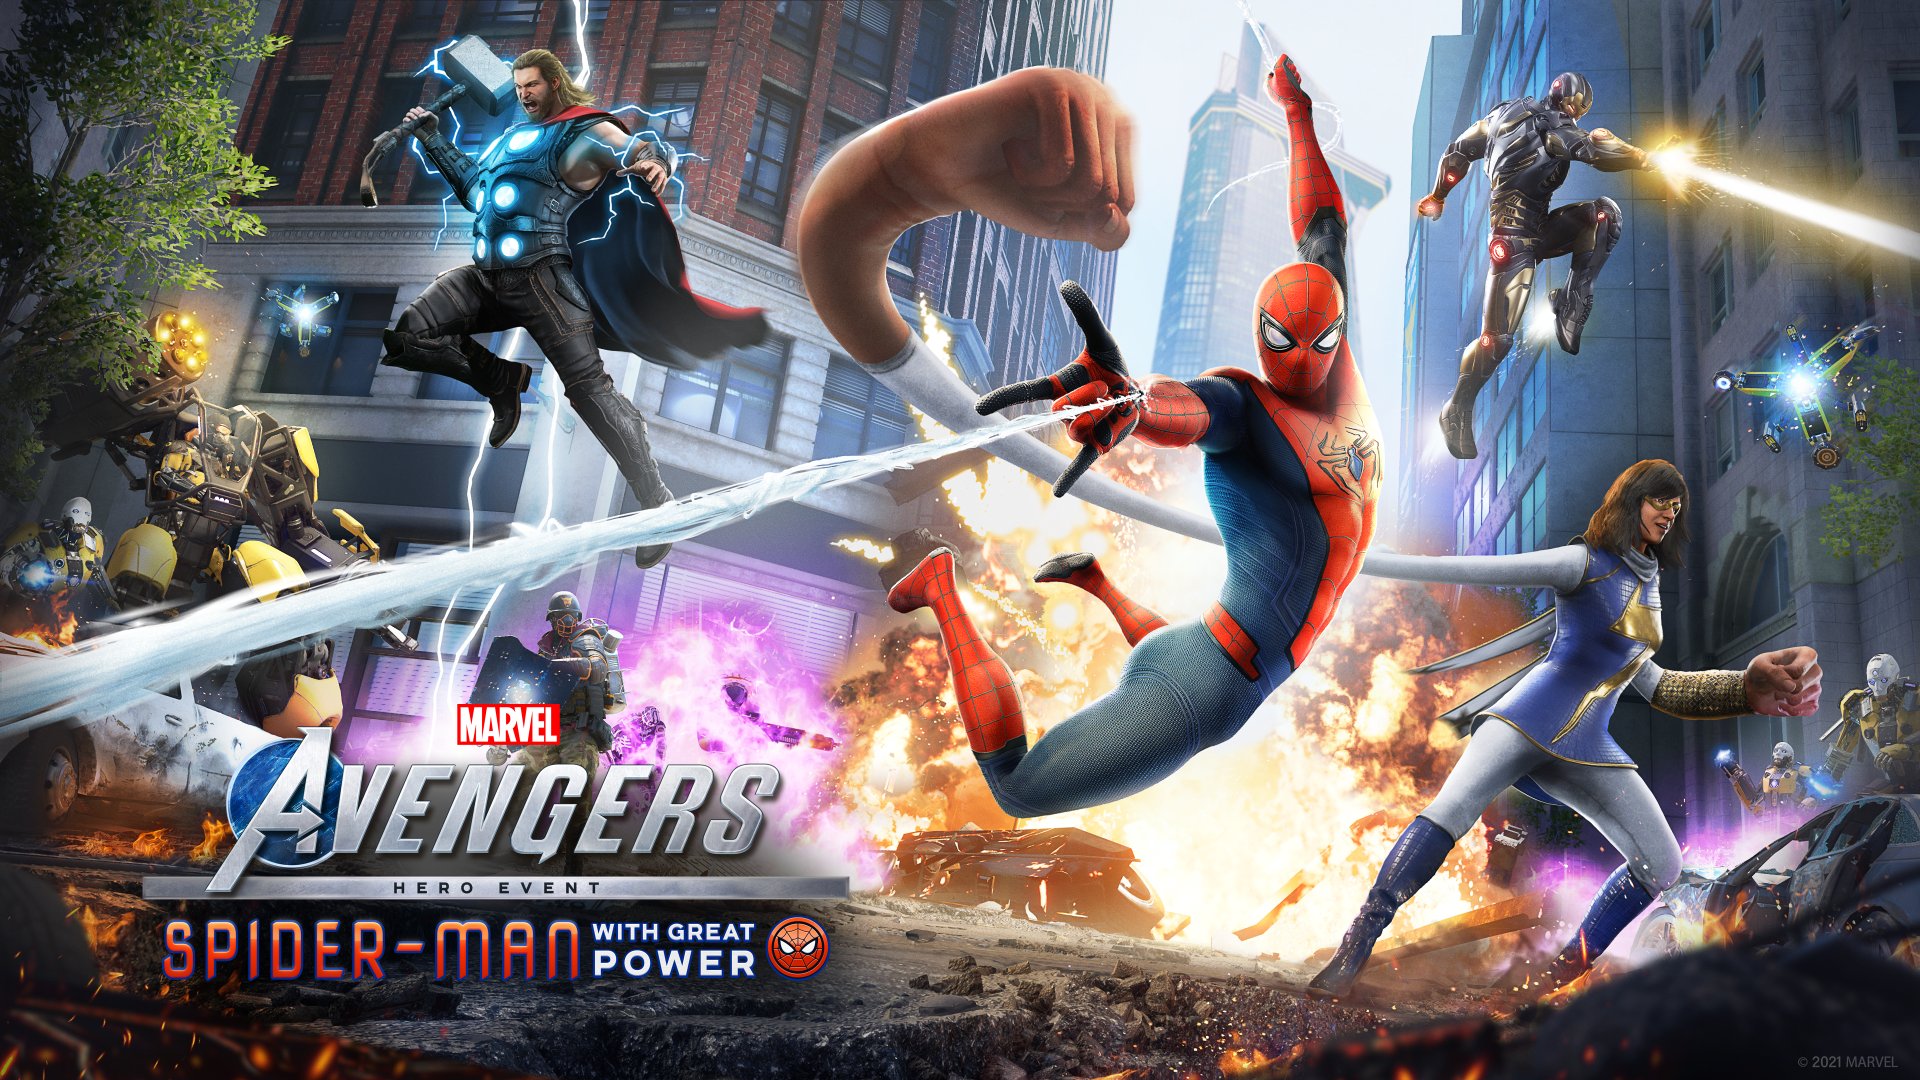 Marvel's Avengers Spider-Man Outfits